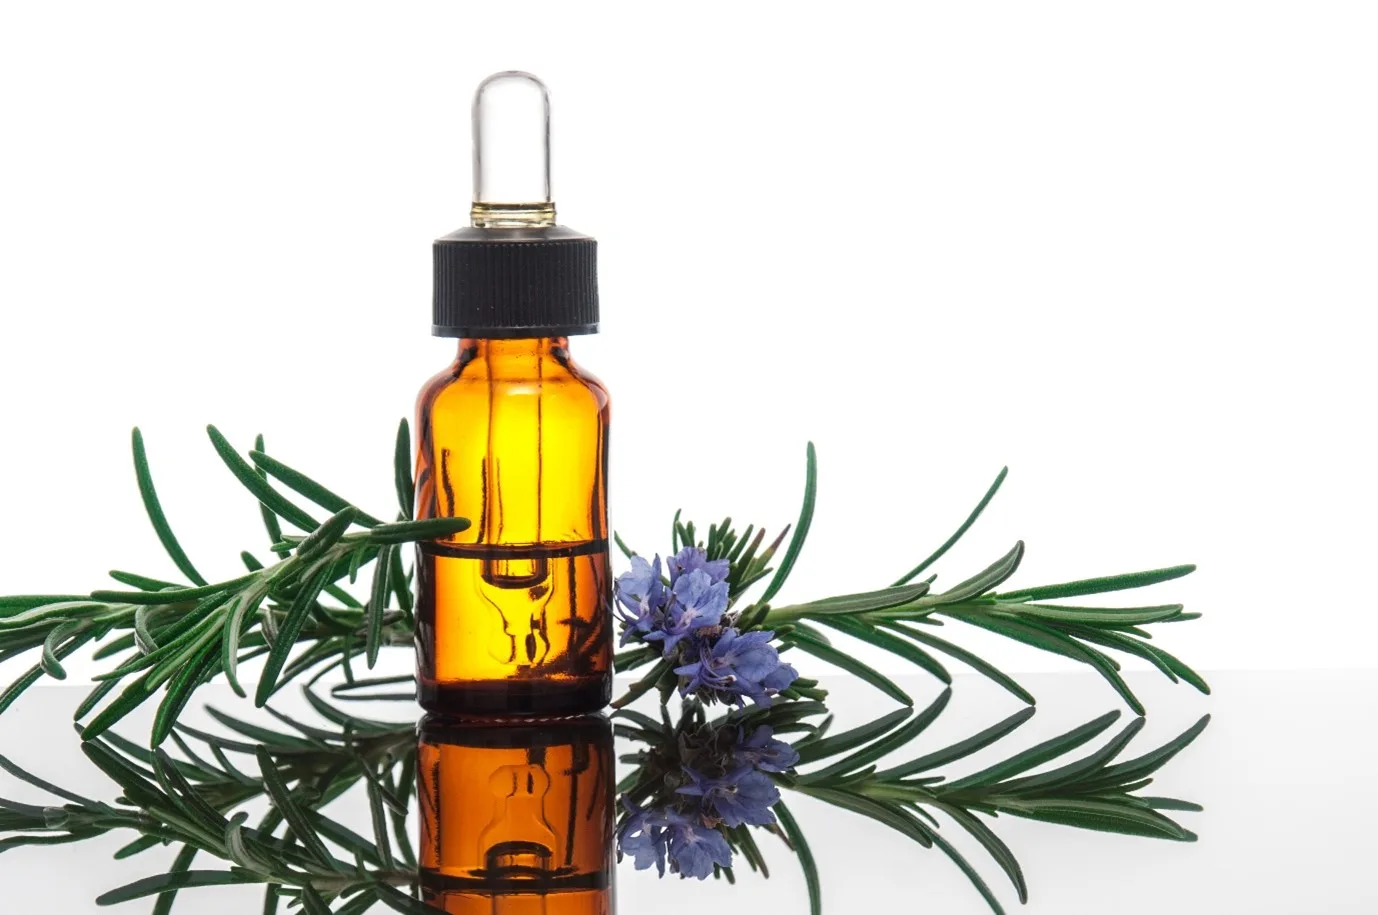 Rosemary oil might be effective for dandruff